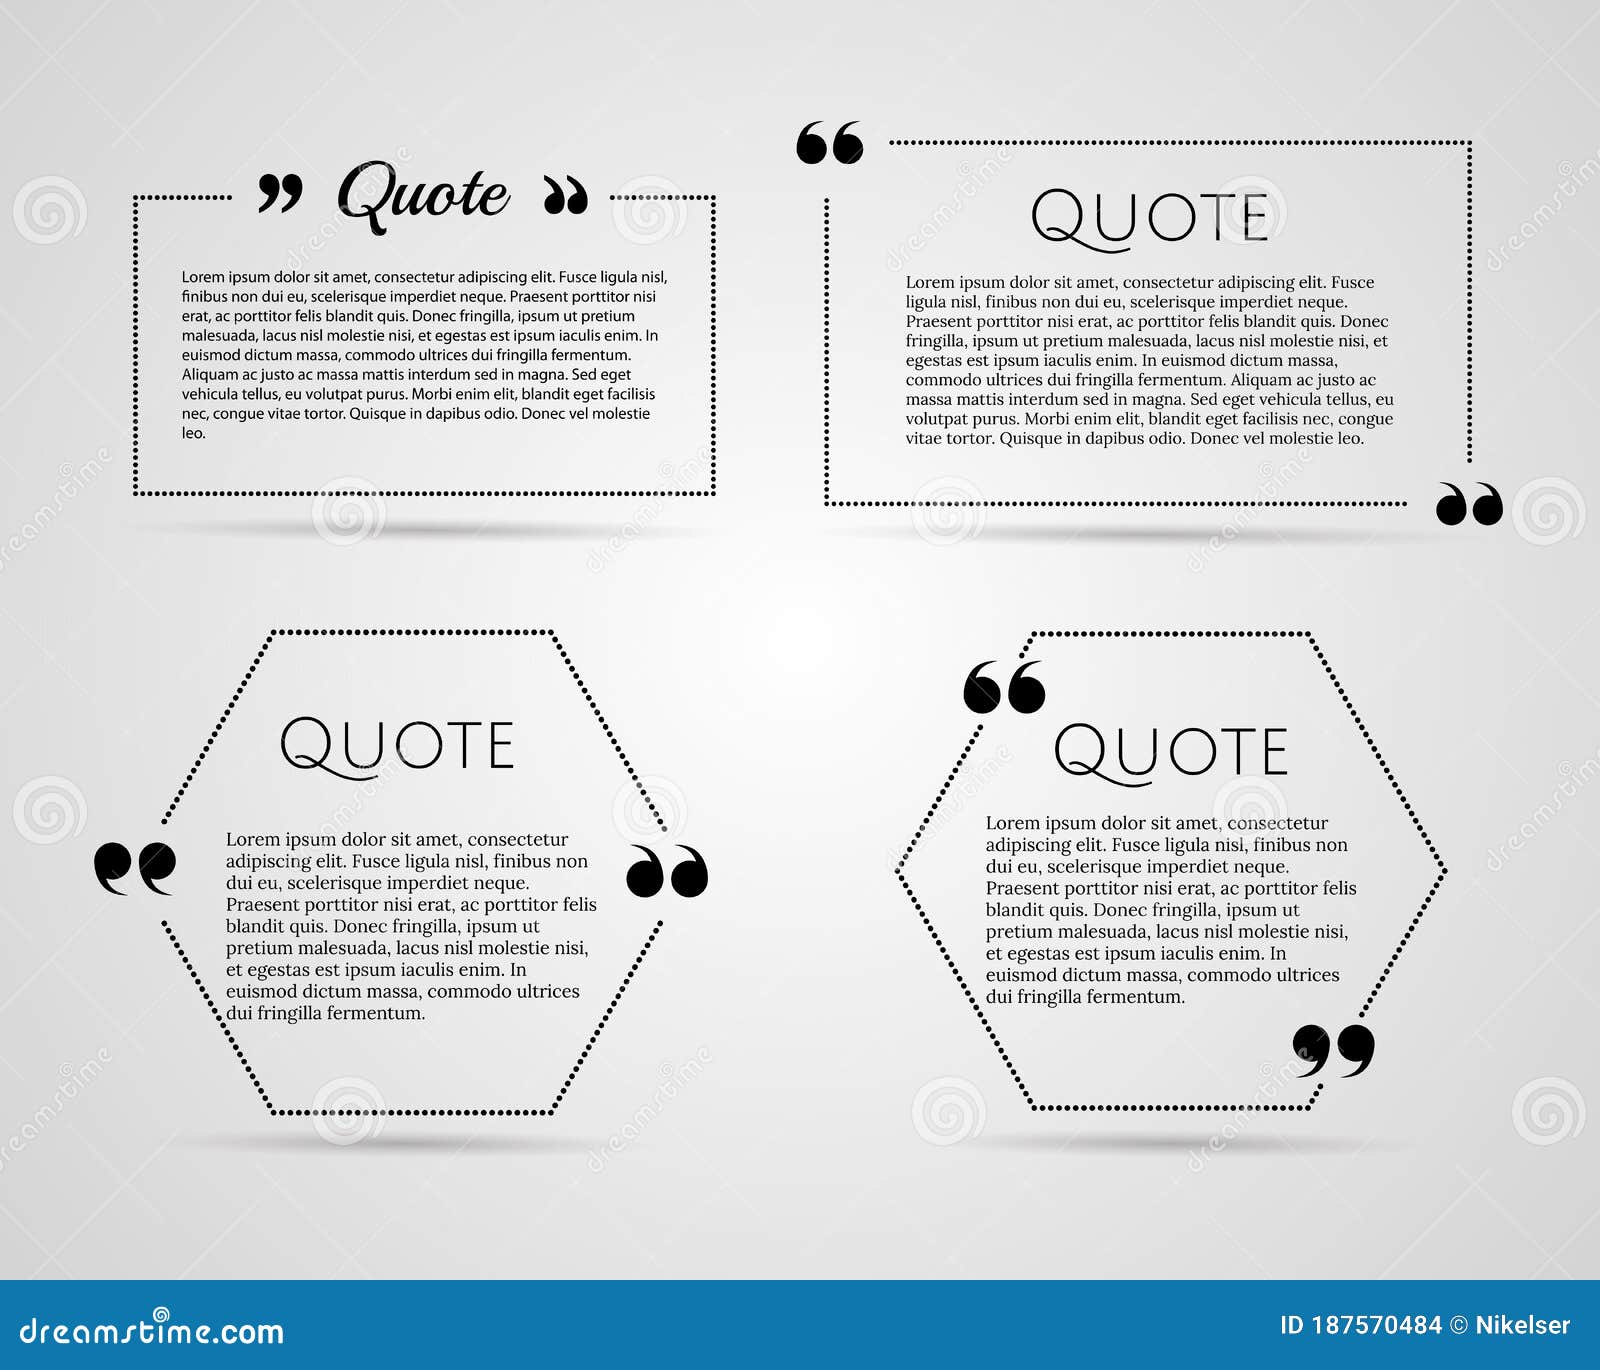 Quote Form Template from thumbs.dreamstime.com